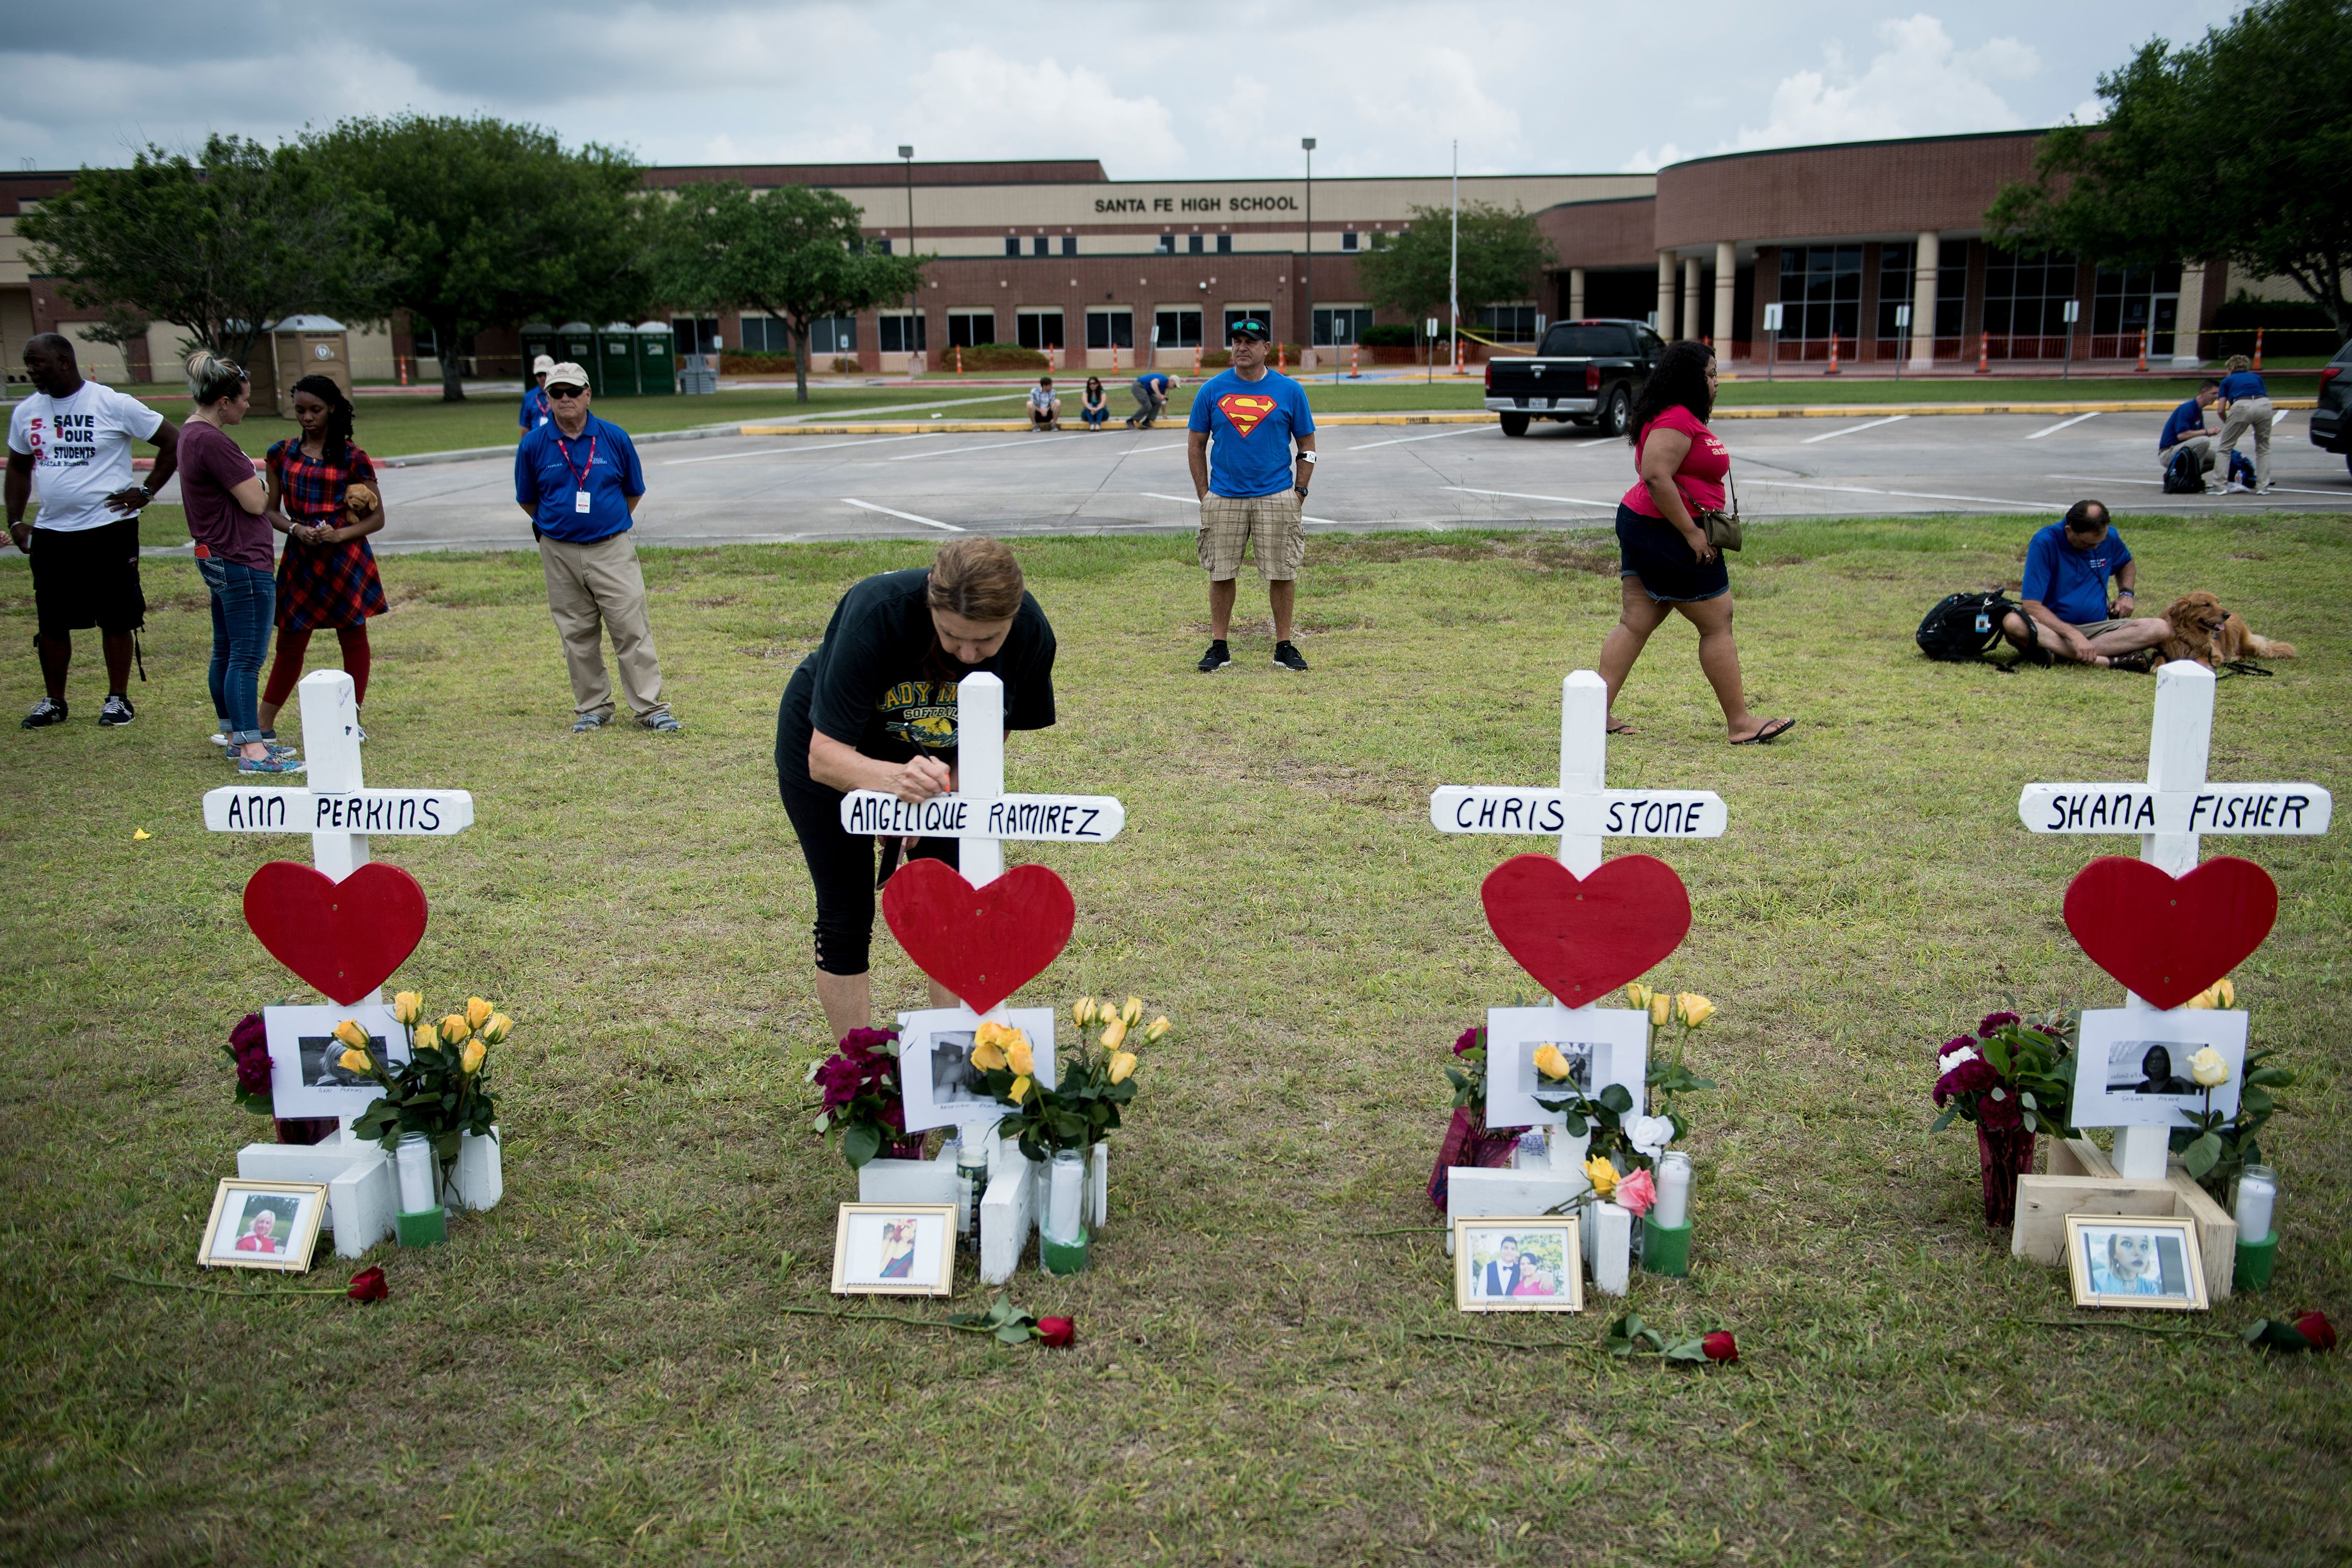 People pay their respects to victims of the Santa Fe High School shooting victims.